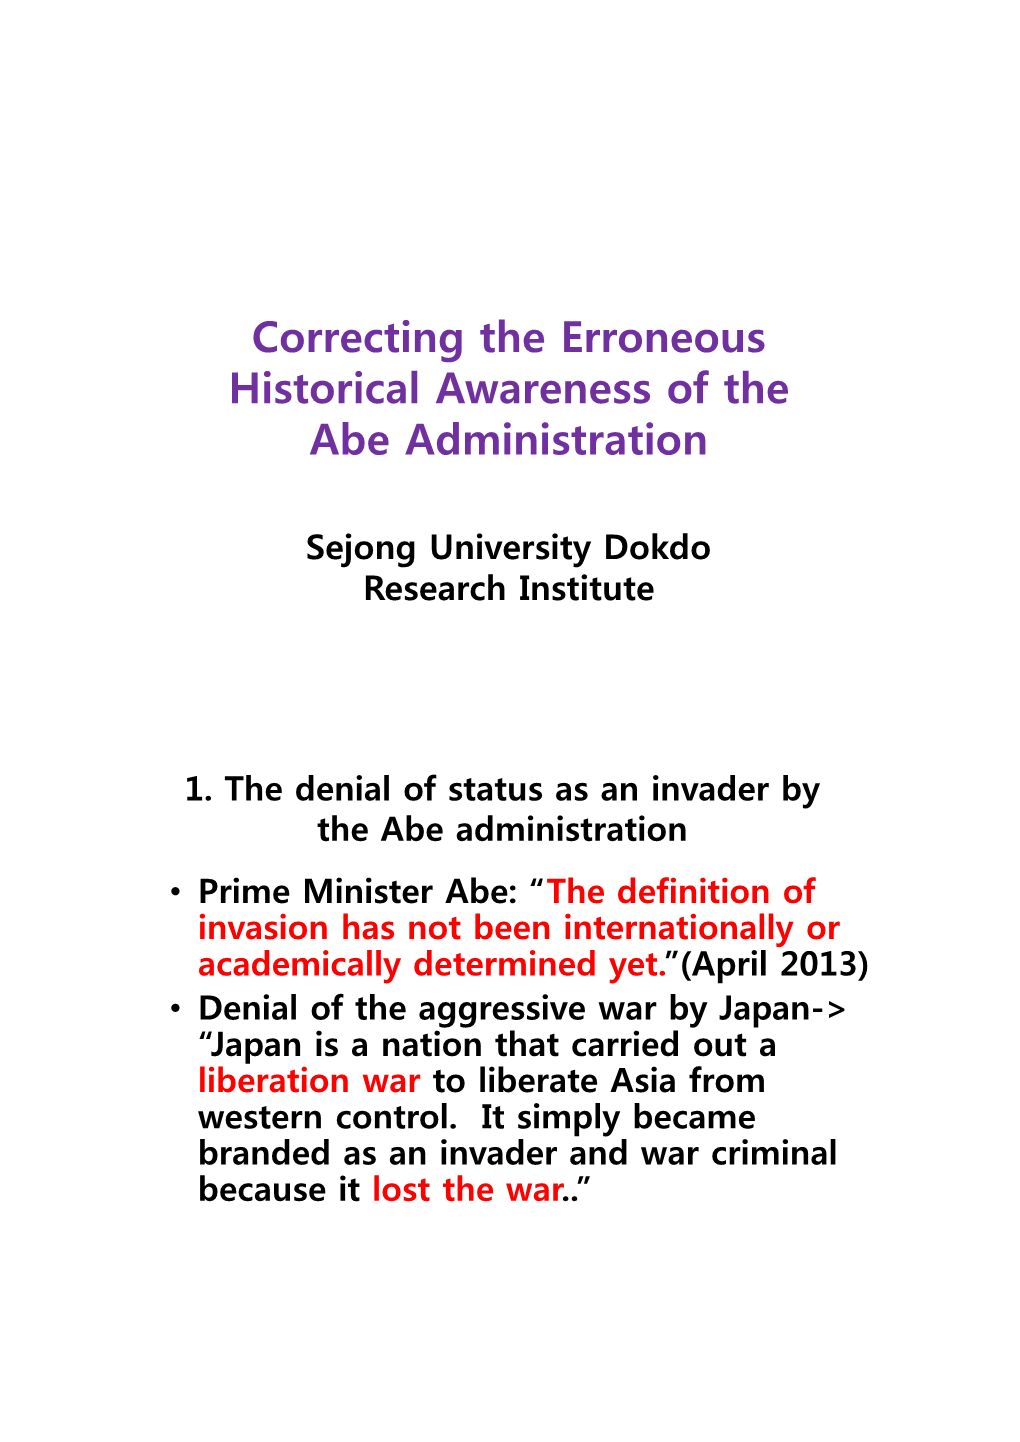 Correcting the Erroneous Historical Awareness of the Abe Administration